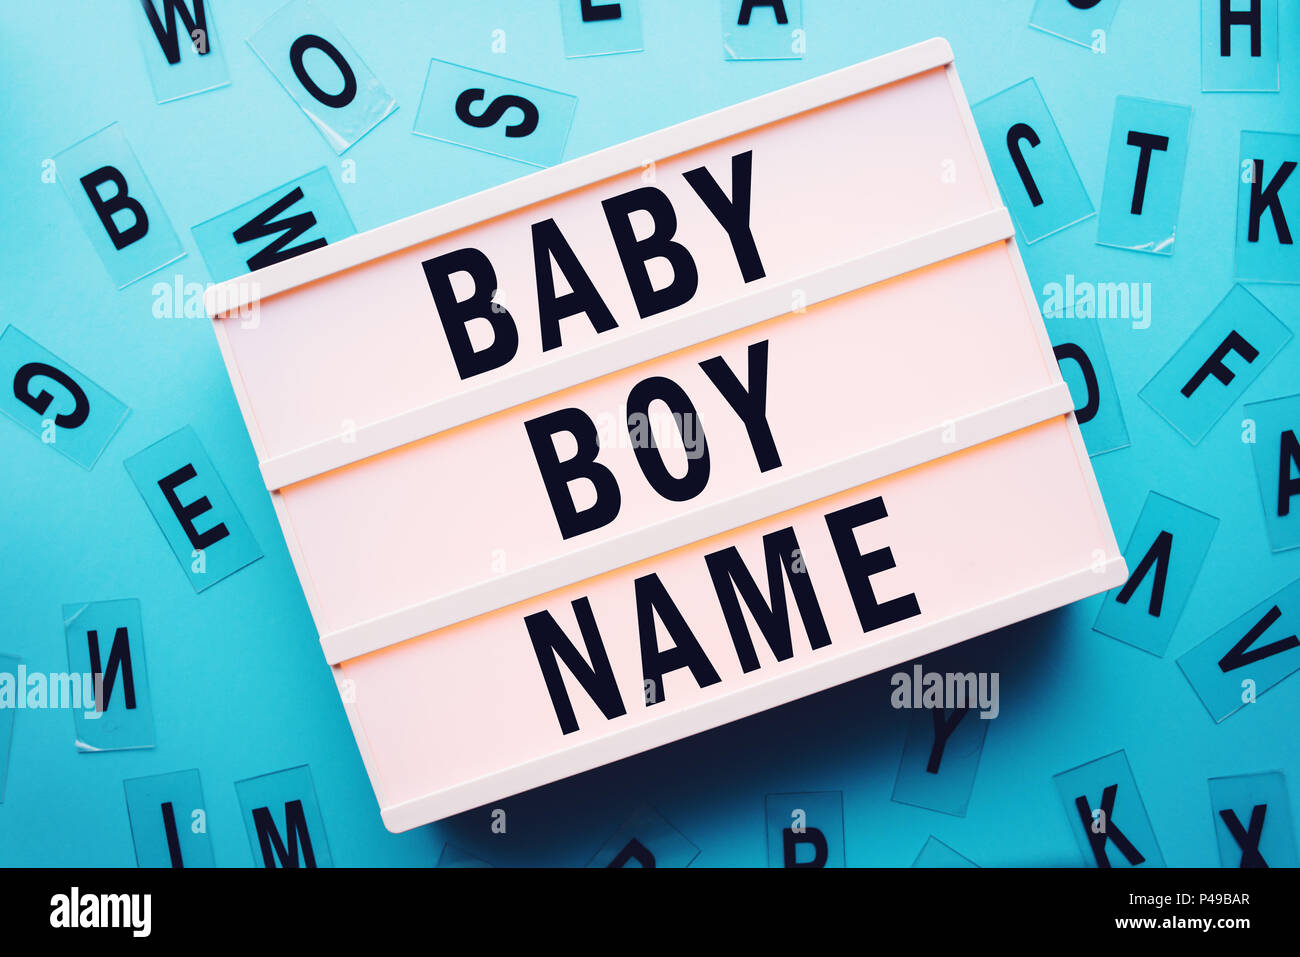 Choosing baby boy name concept with lightbox and various letters scattered around Stock Photo